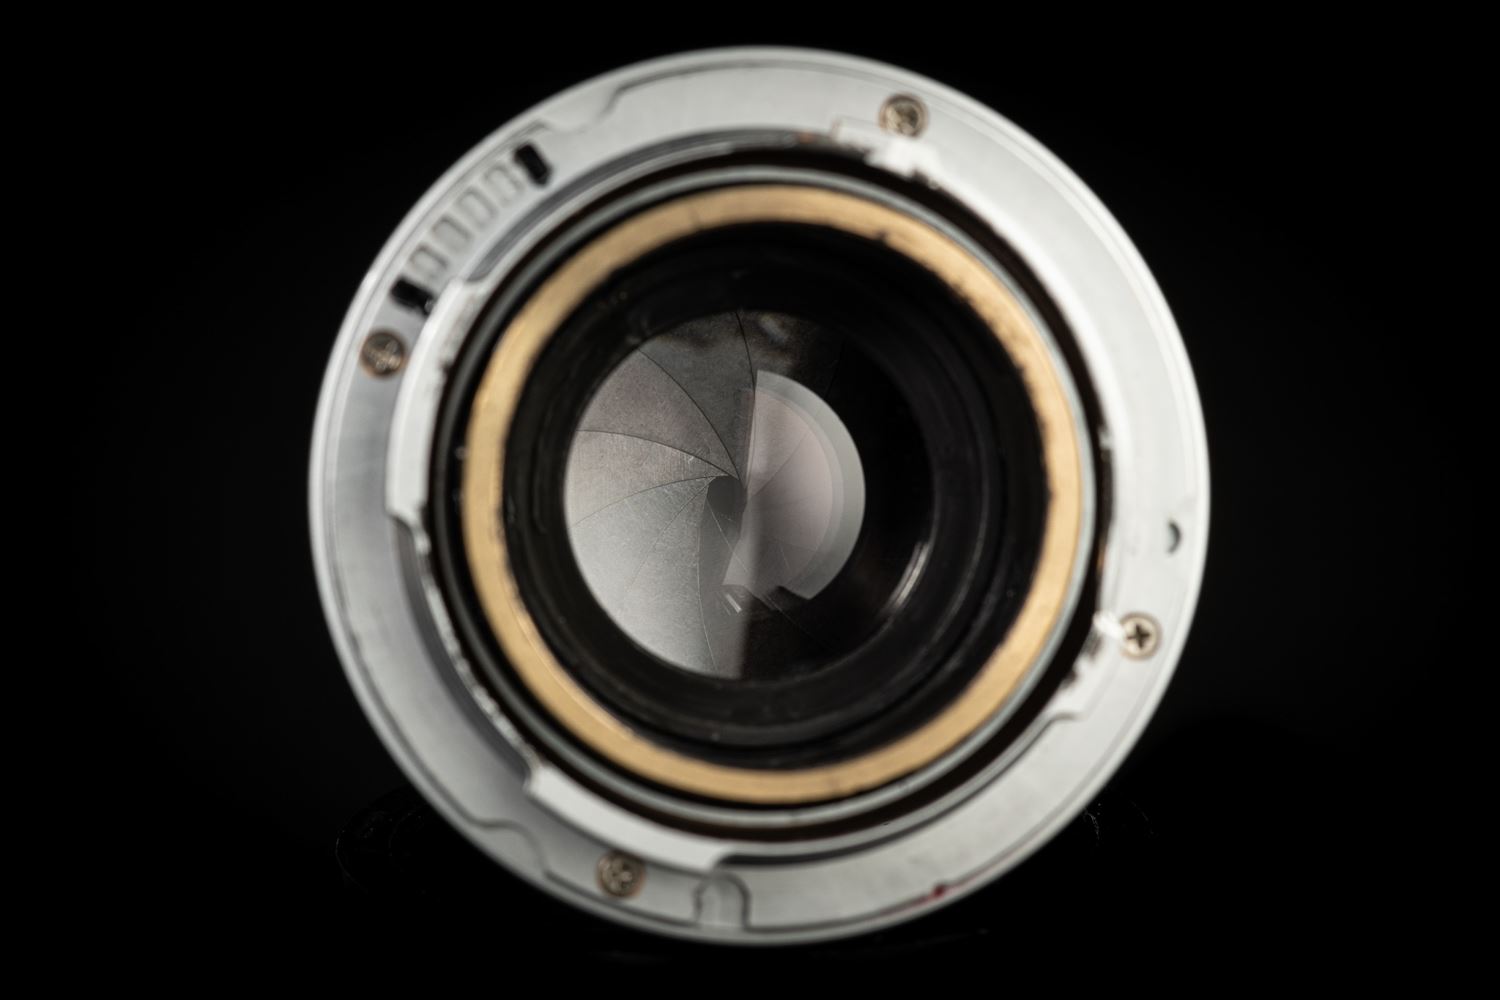 Picture of Dallmeyer Super-Six Anastigmat 51mm f/1.9 Mod. To Leica M